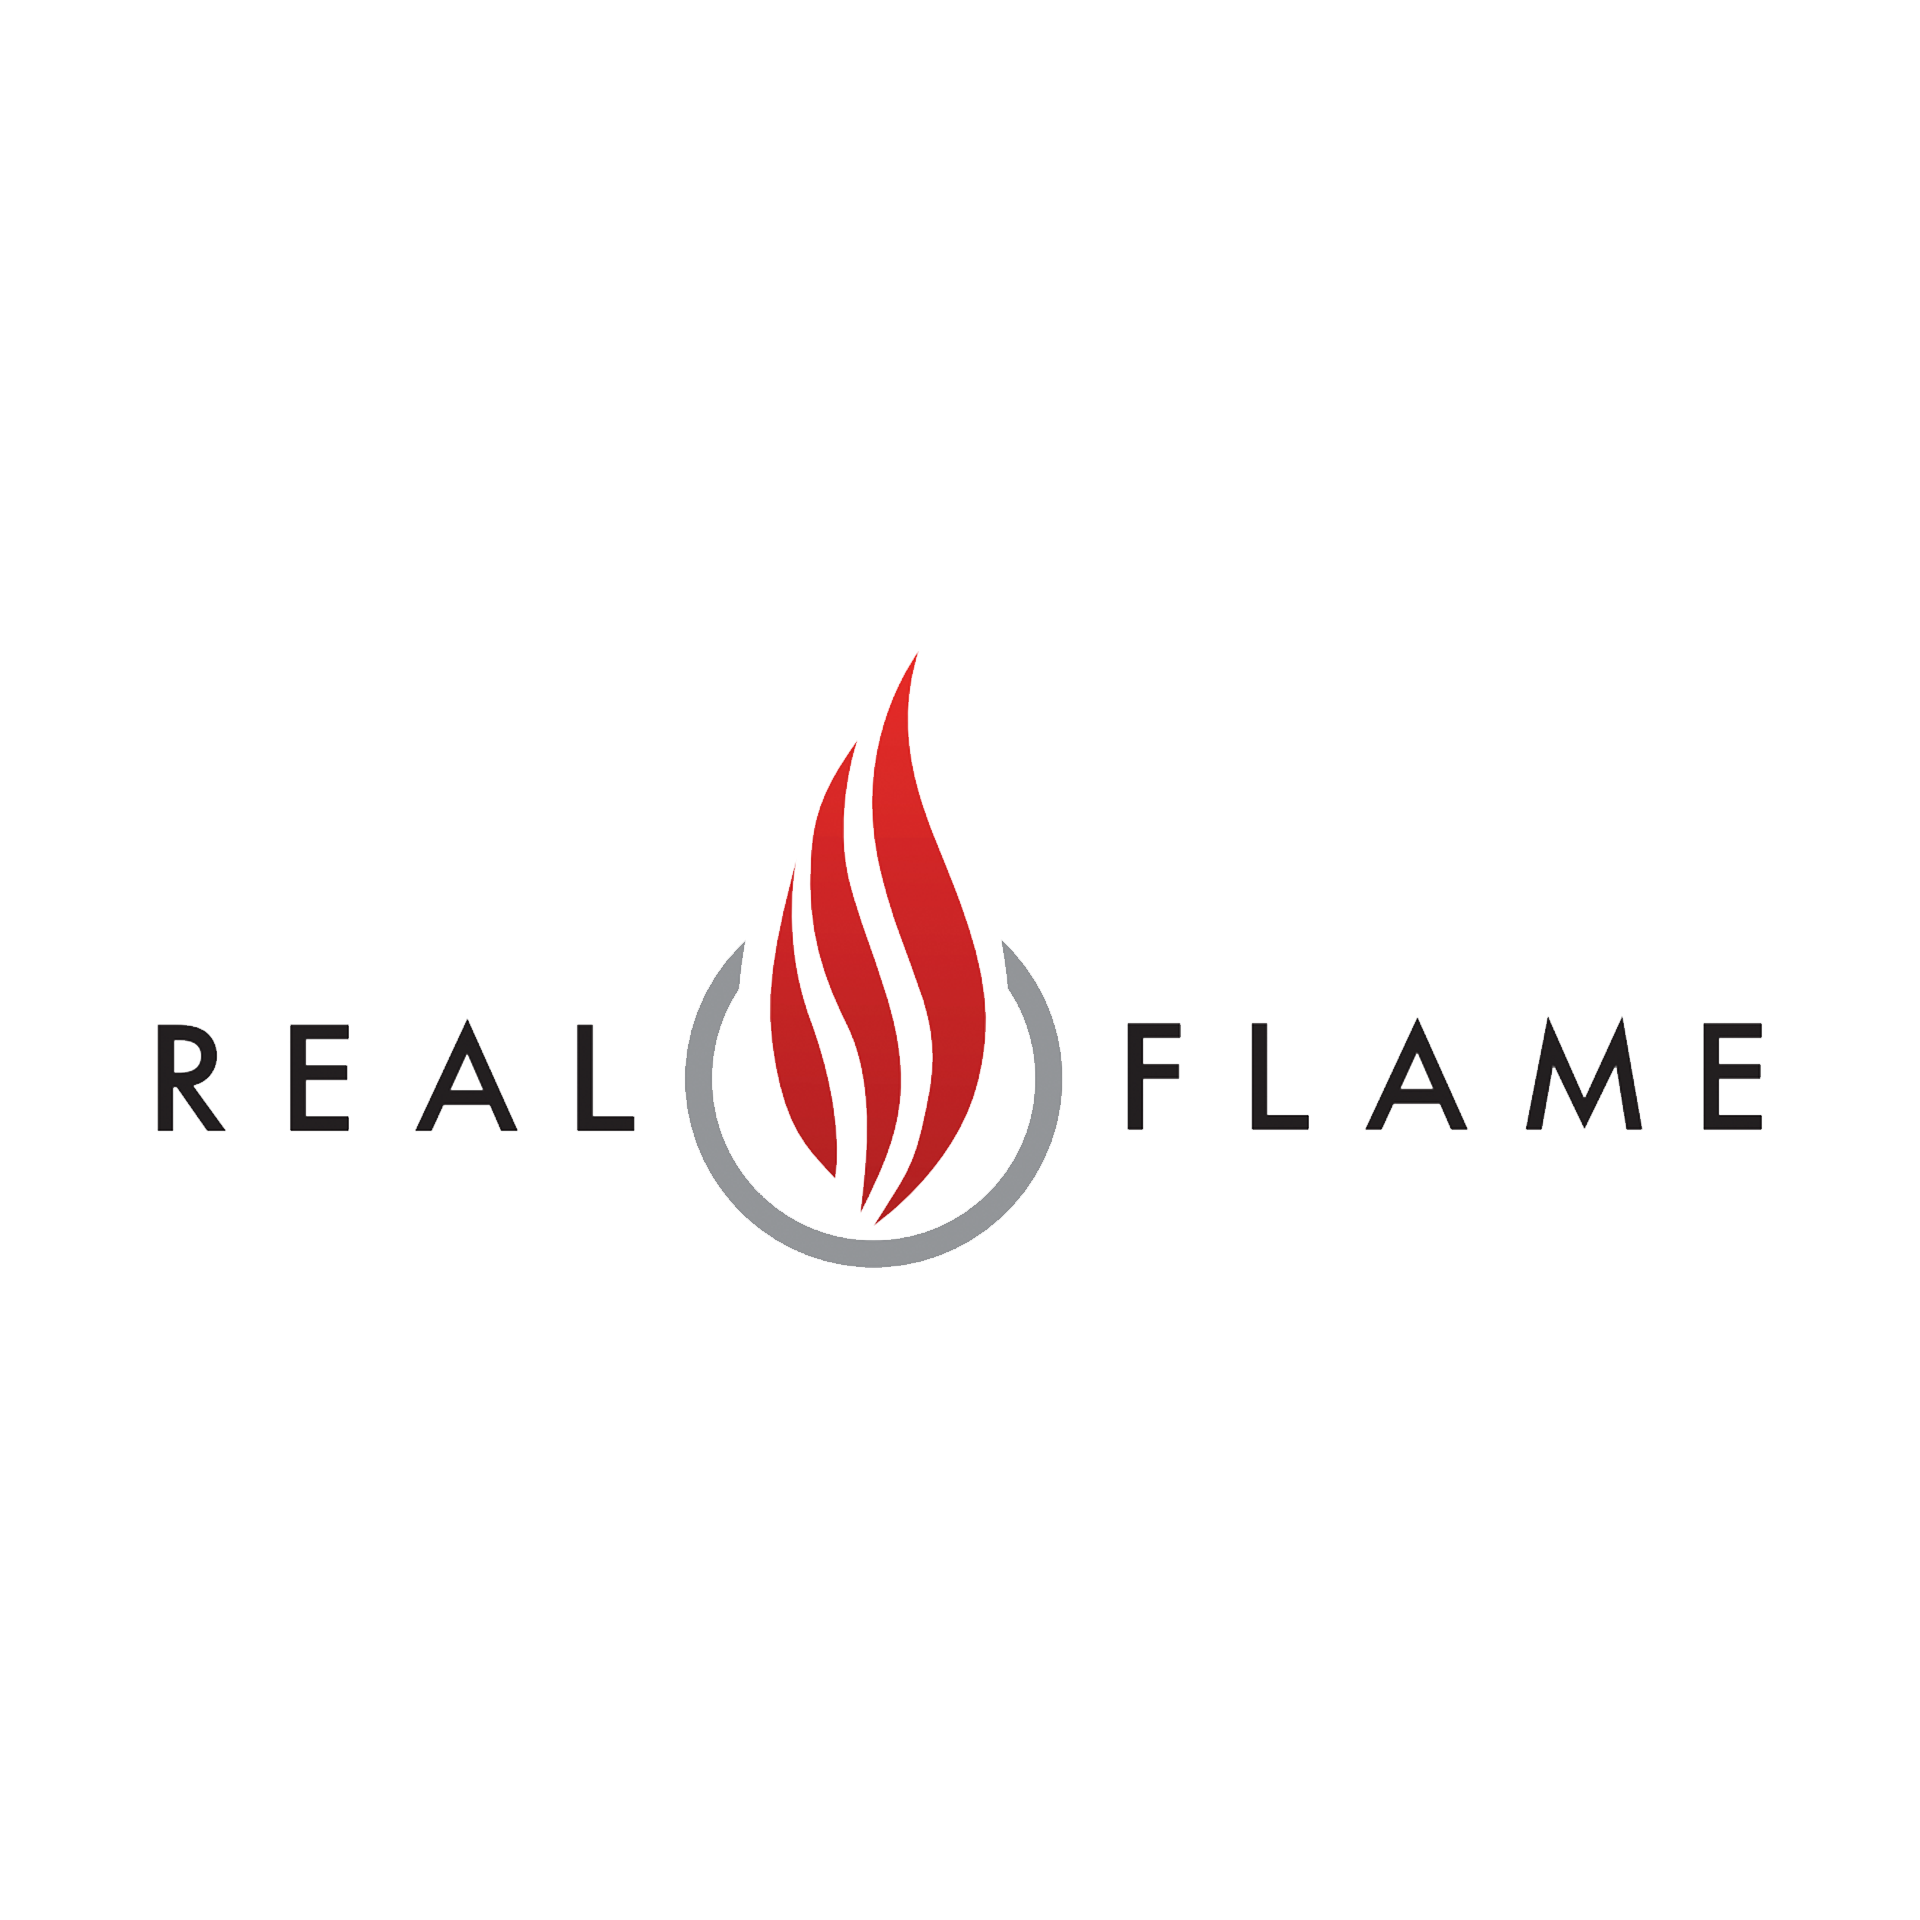 Real flame logo on white background